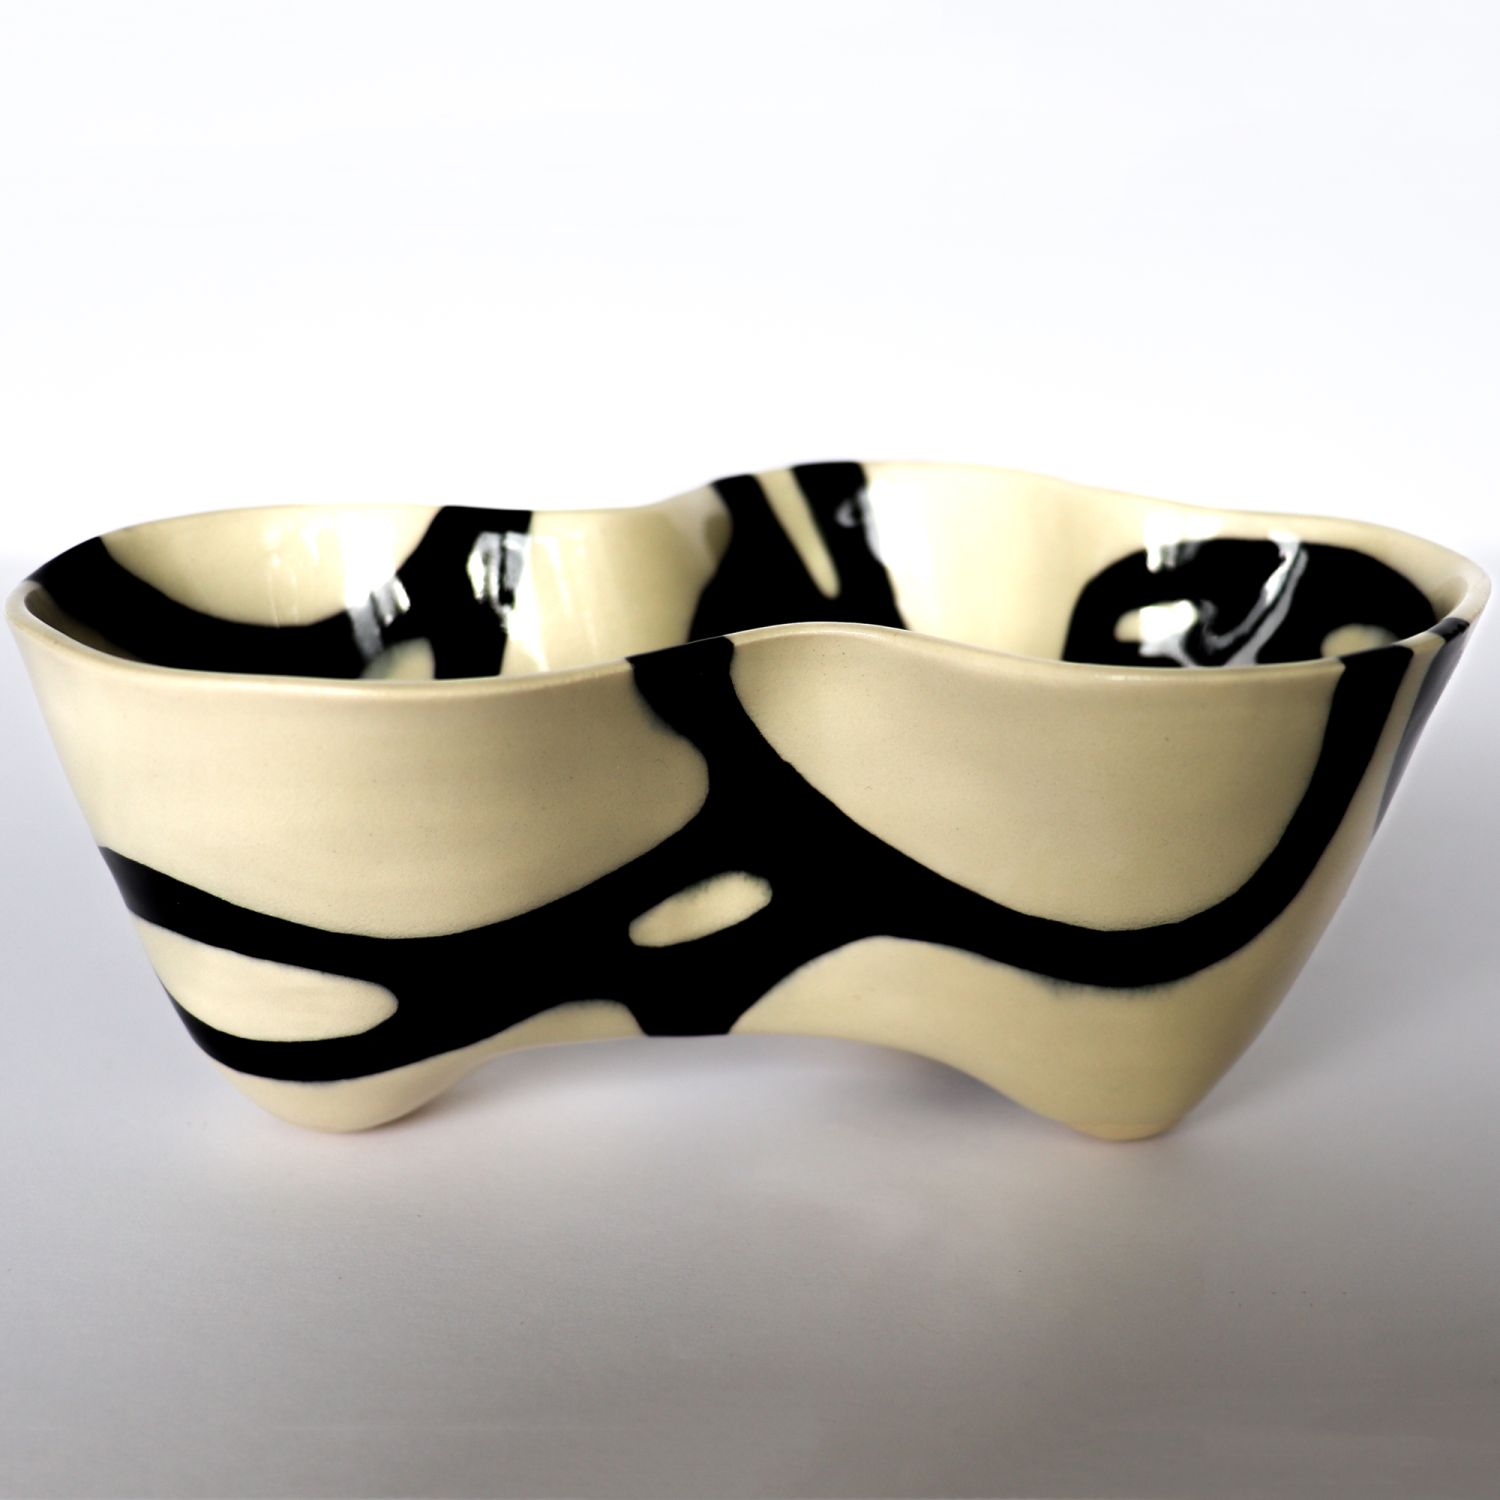 Alana Marcoccia: Interconnected Sculptural Bowl Product Image 10 of 12